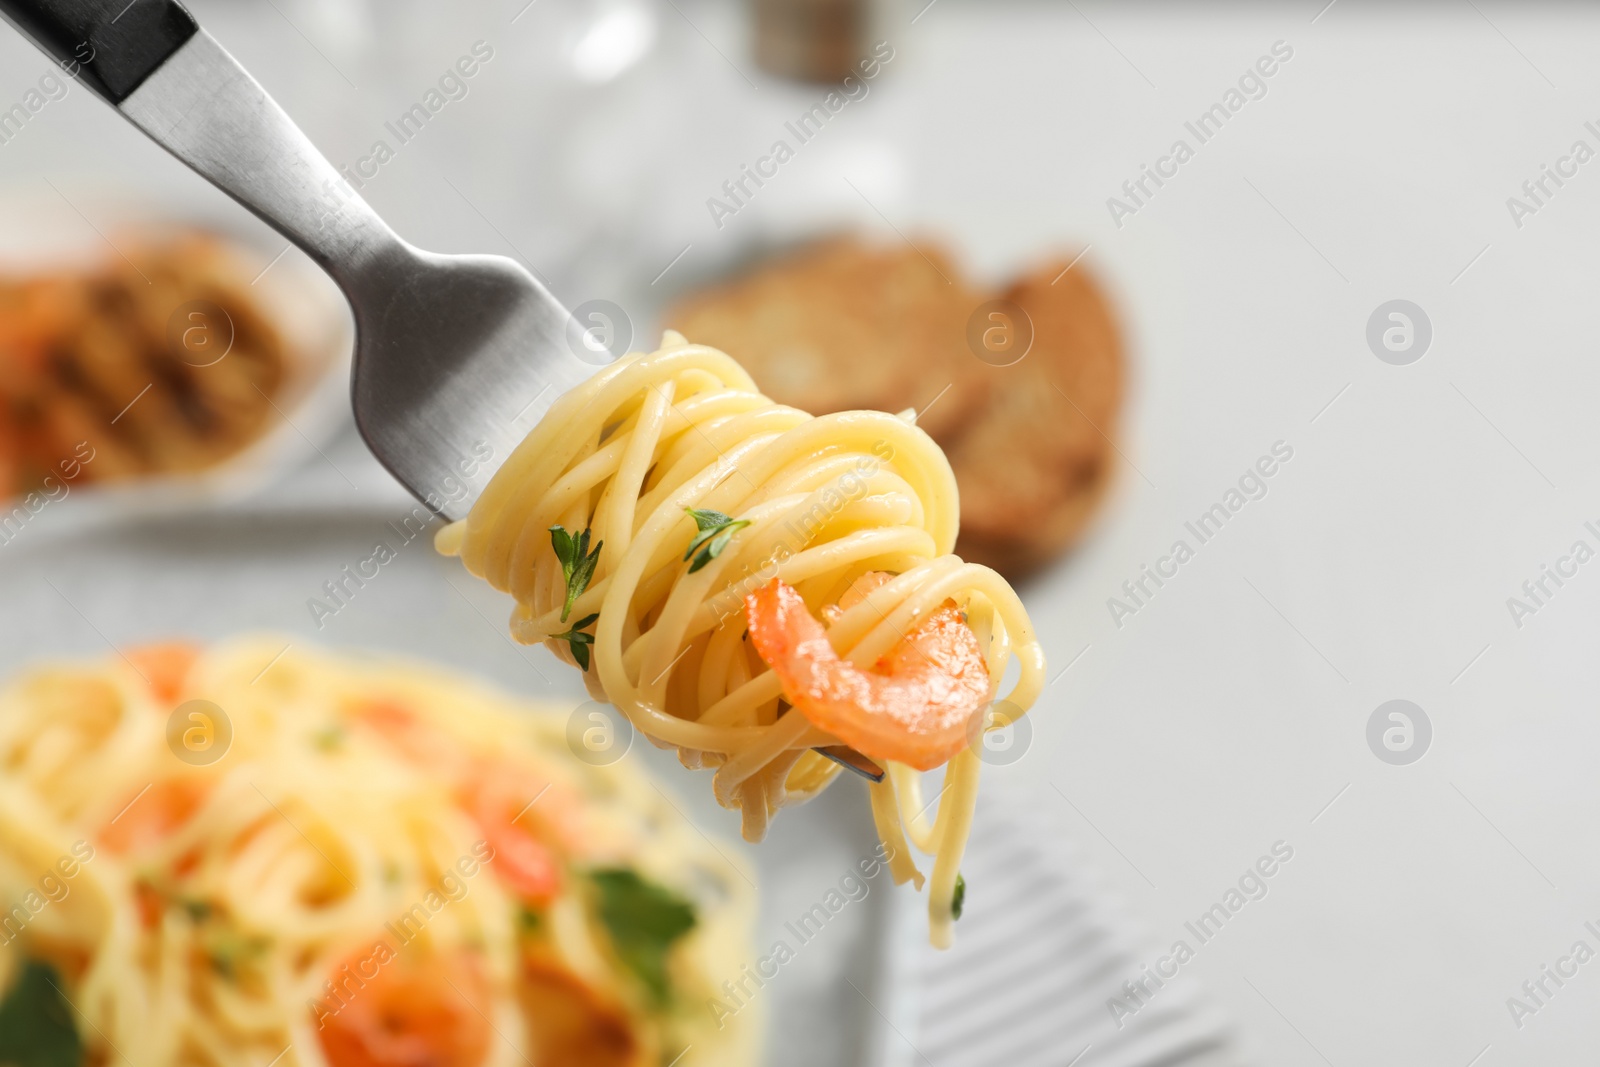 Photo of Eating of delicious pasta with shrimp, closeup